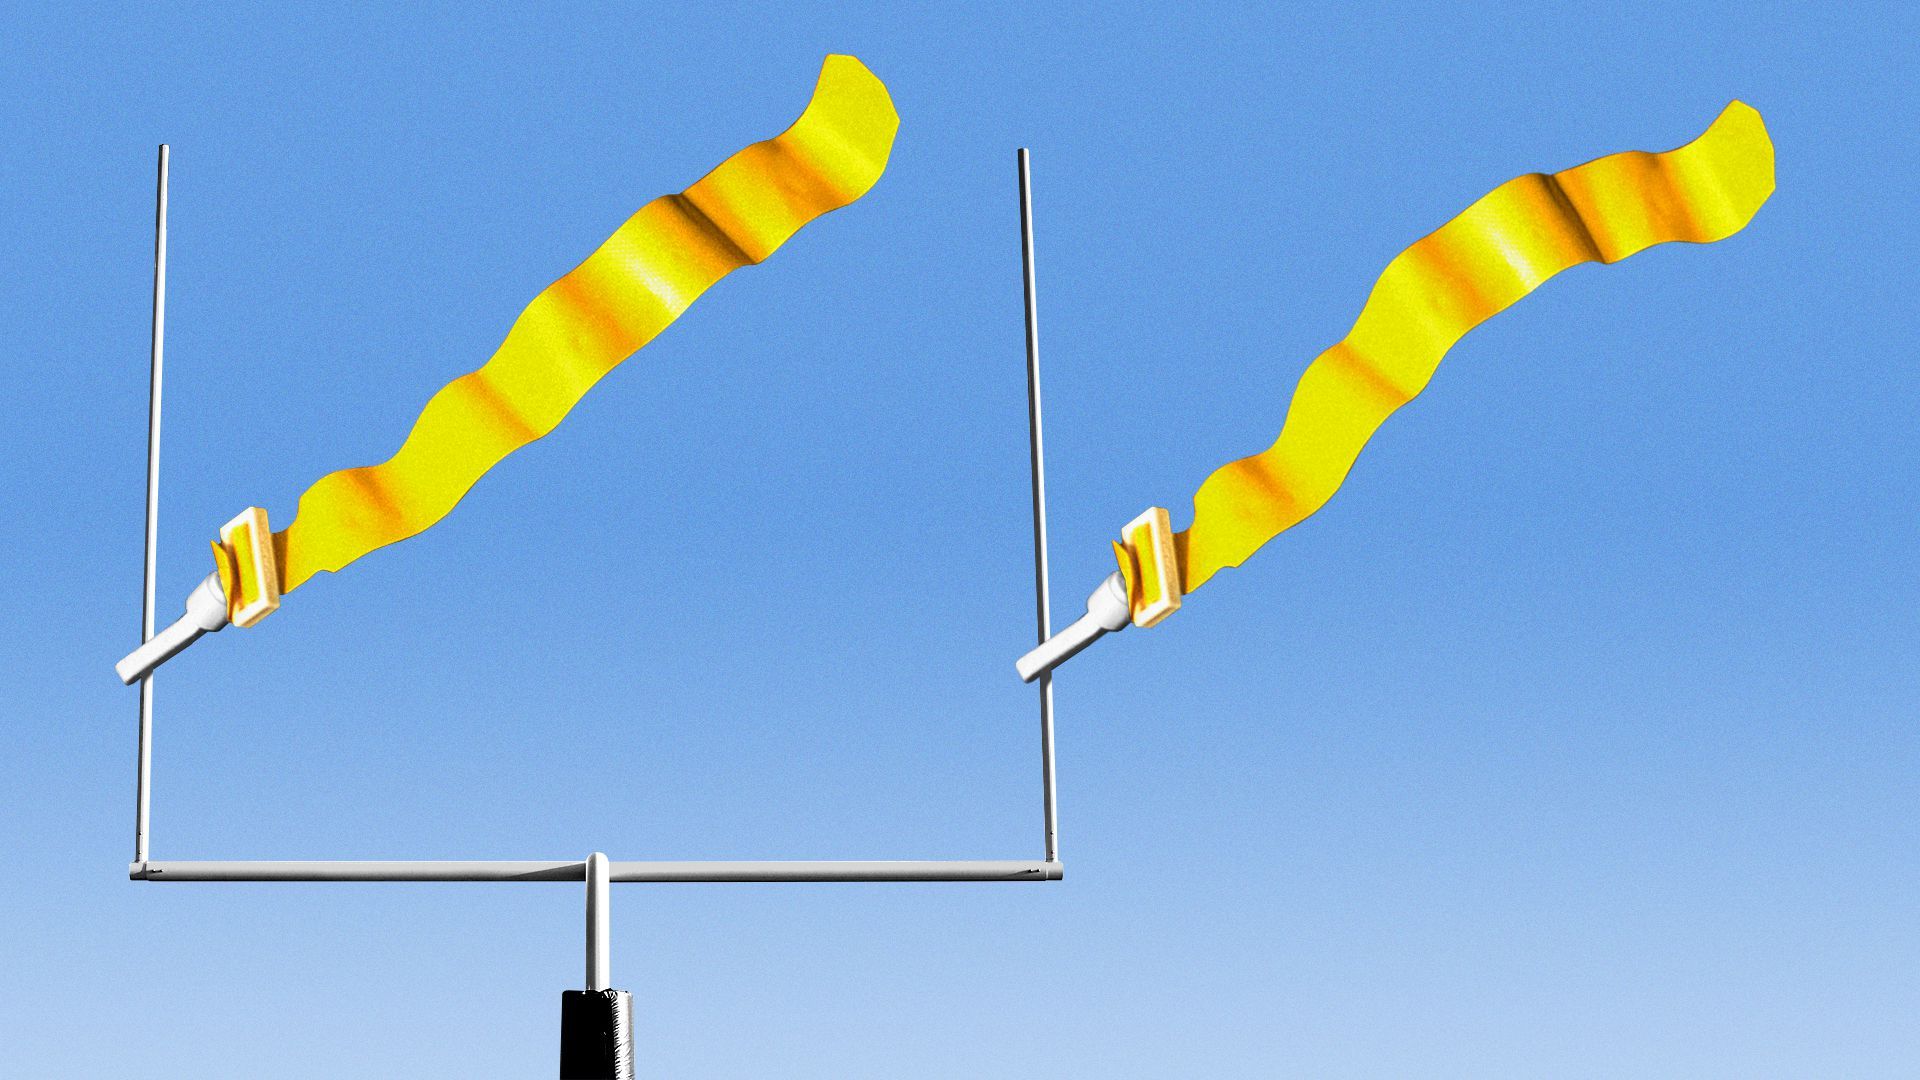 Illustration of a football end zone goal post with two attached flags waving